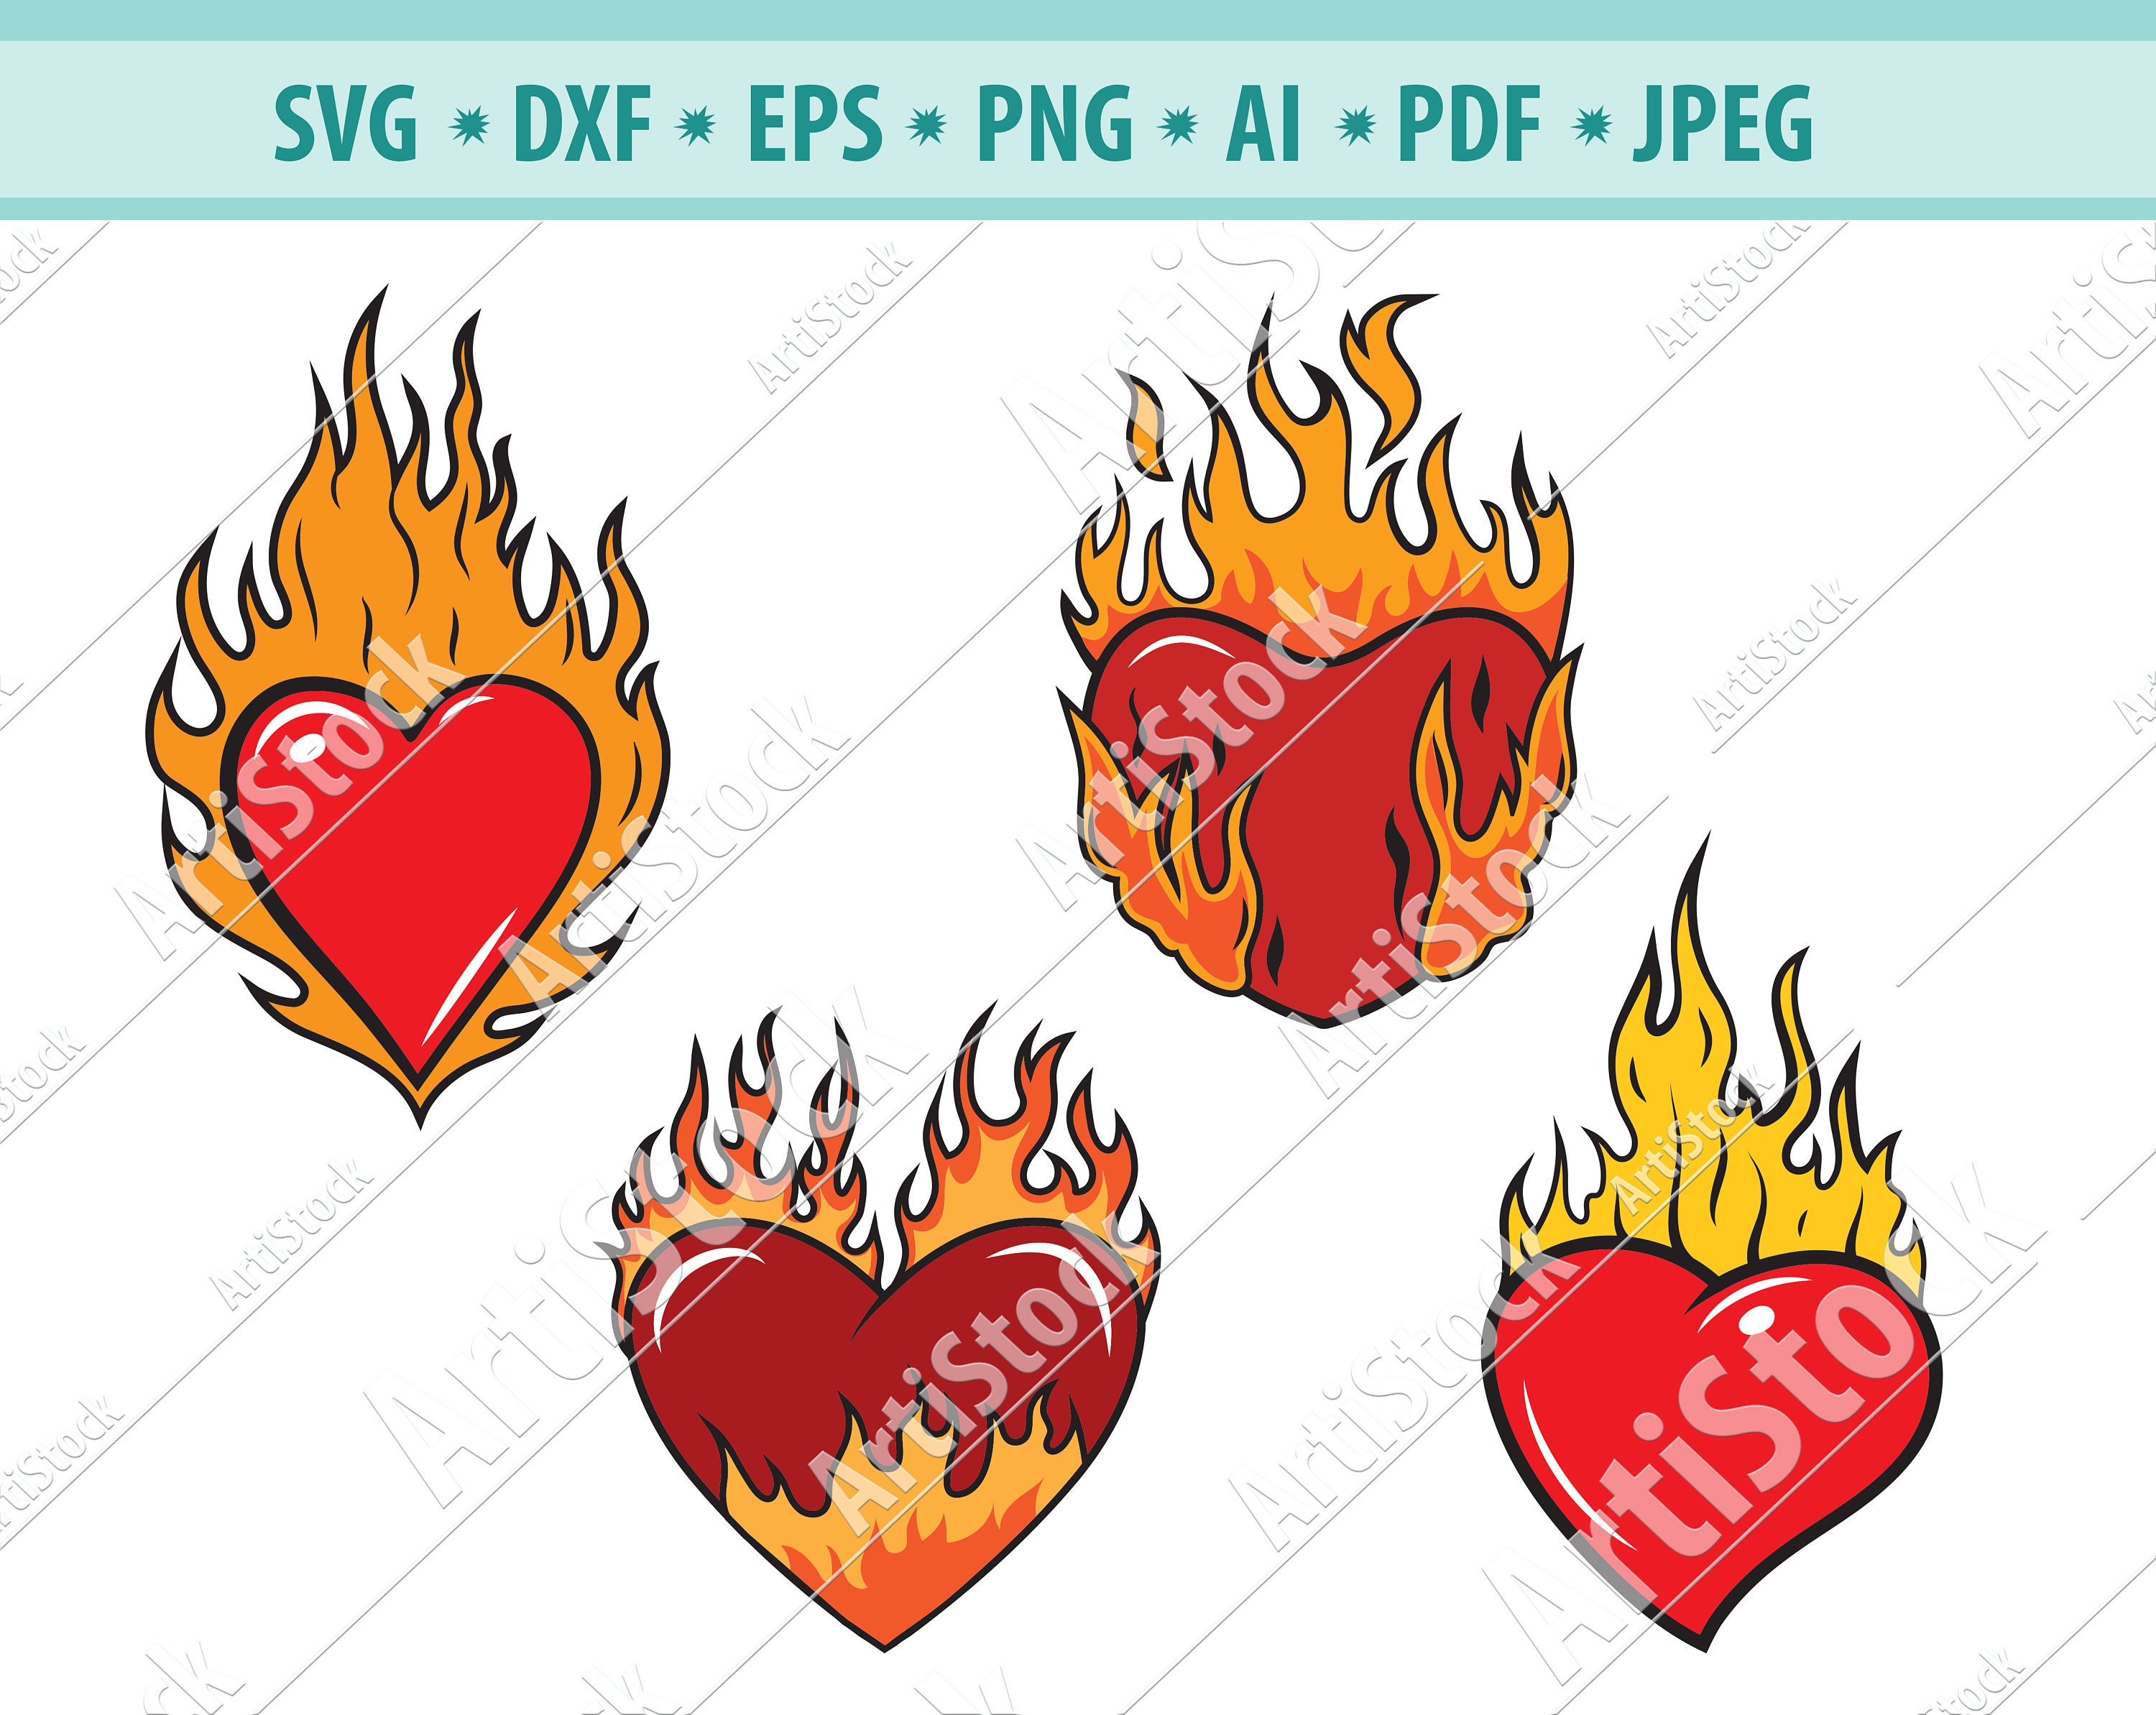 Tattoo heart with flame pattern in the style of - Stock